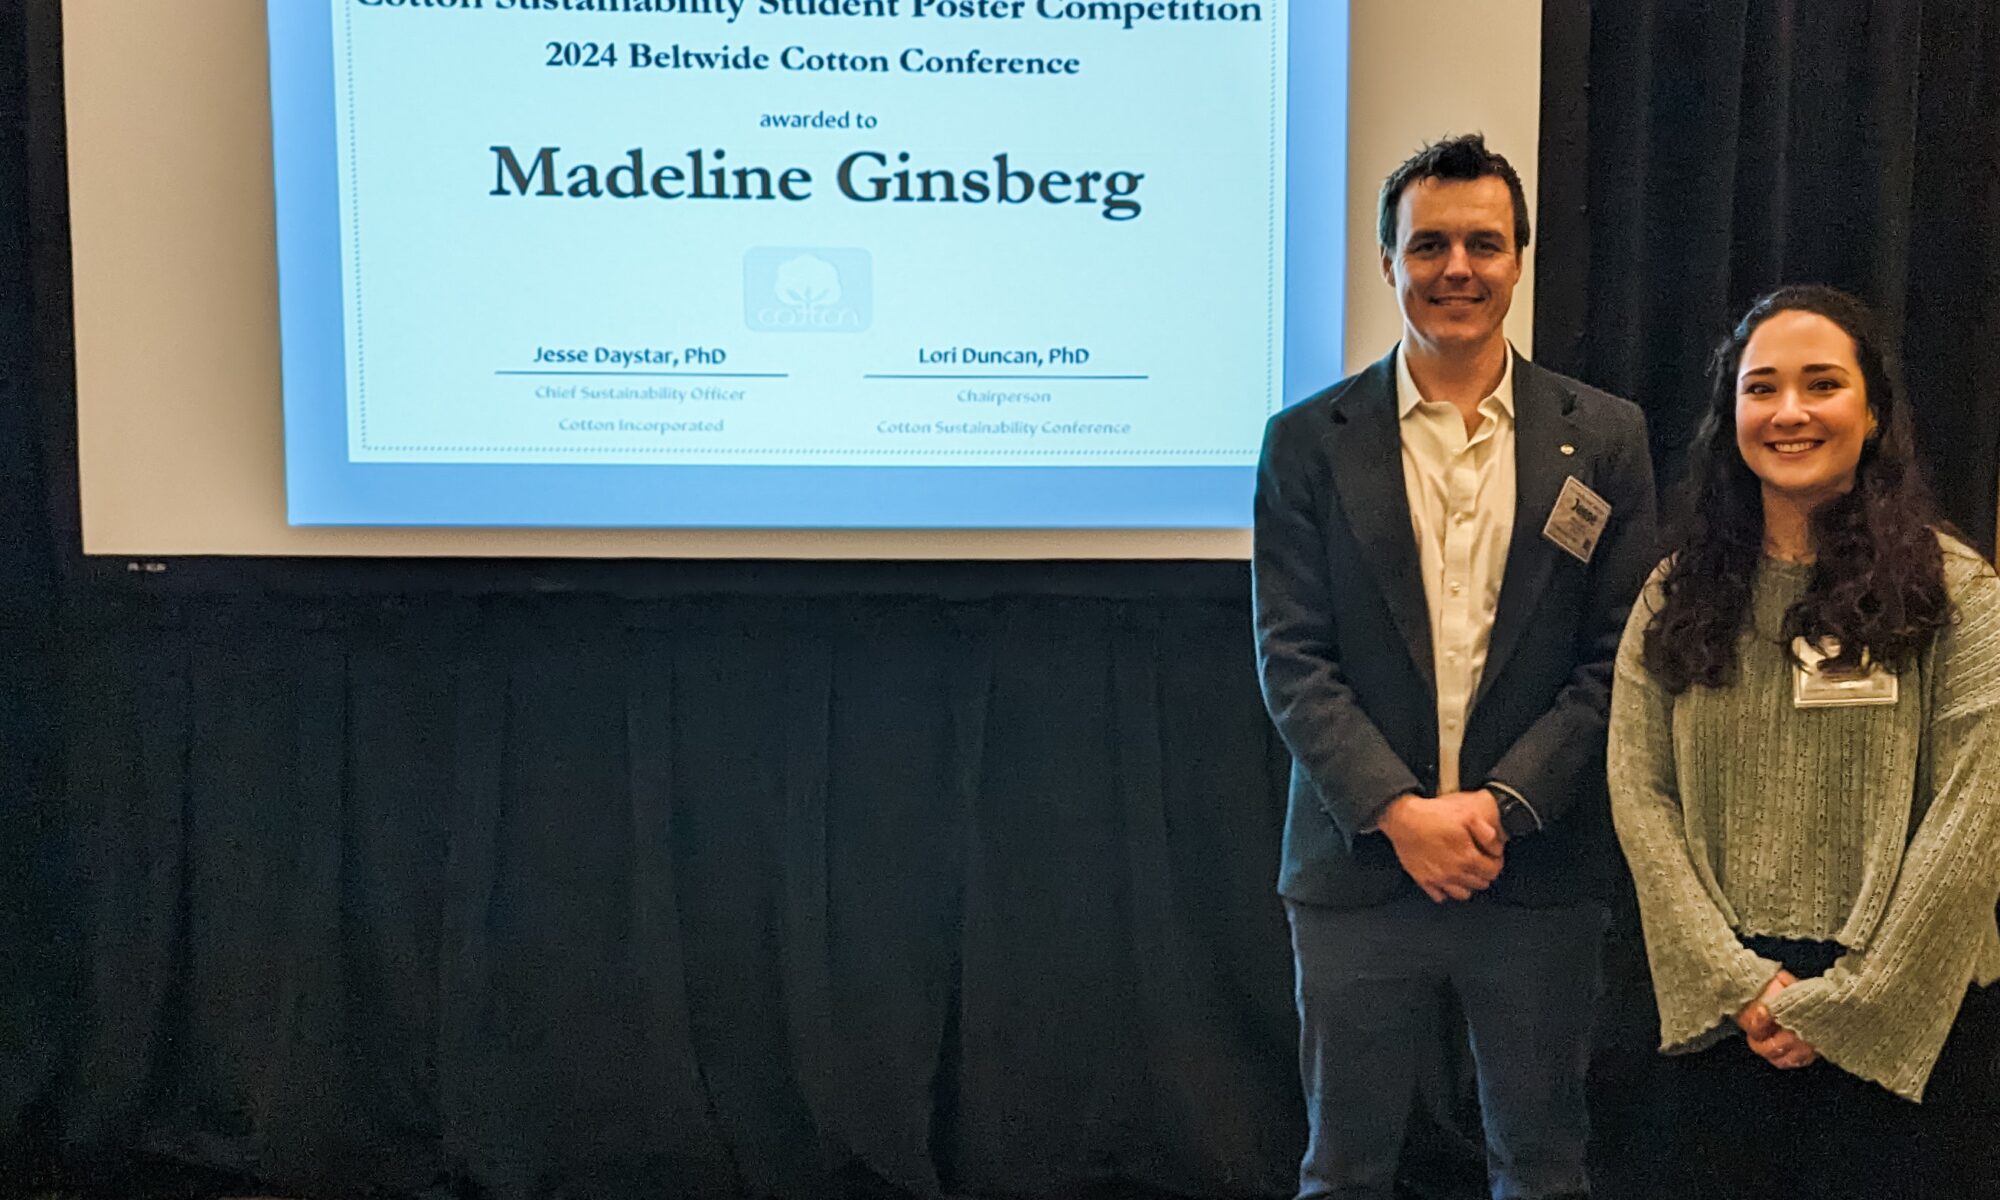 Maddie Ginsberg at the 2024 Beltwide Cotton Conference